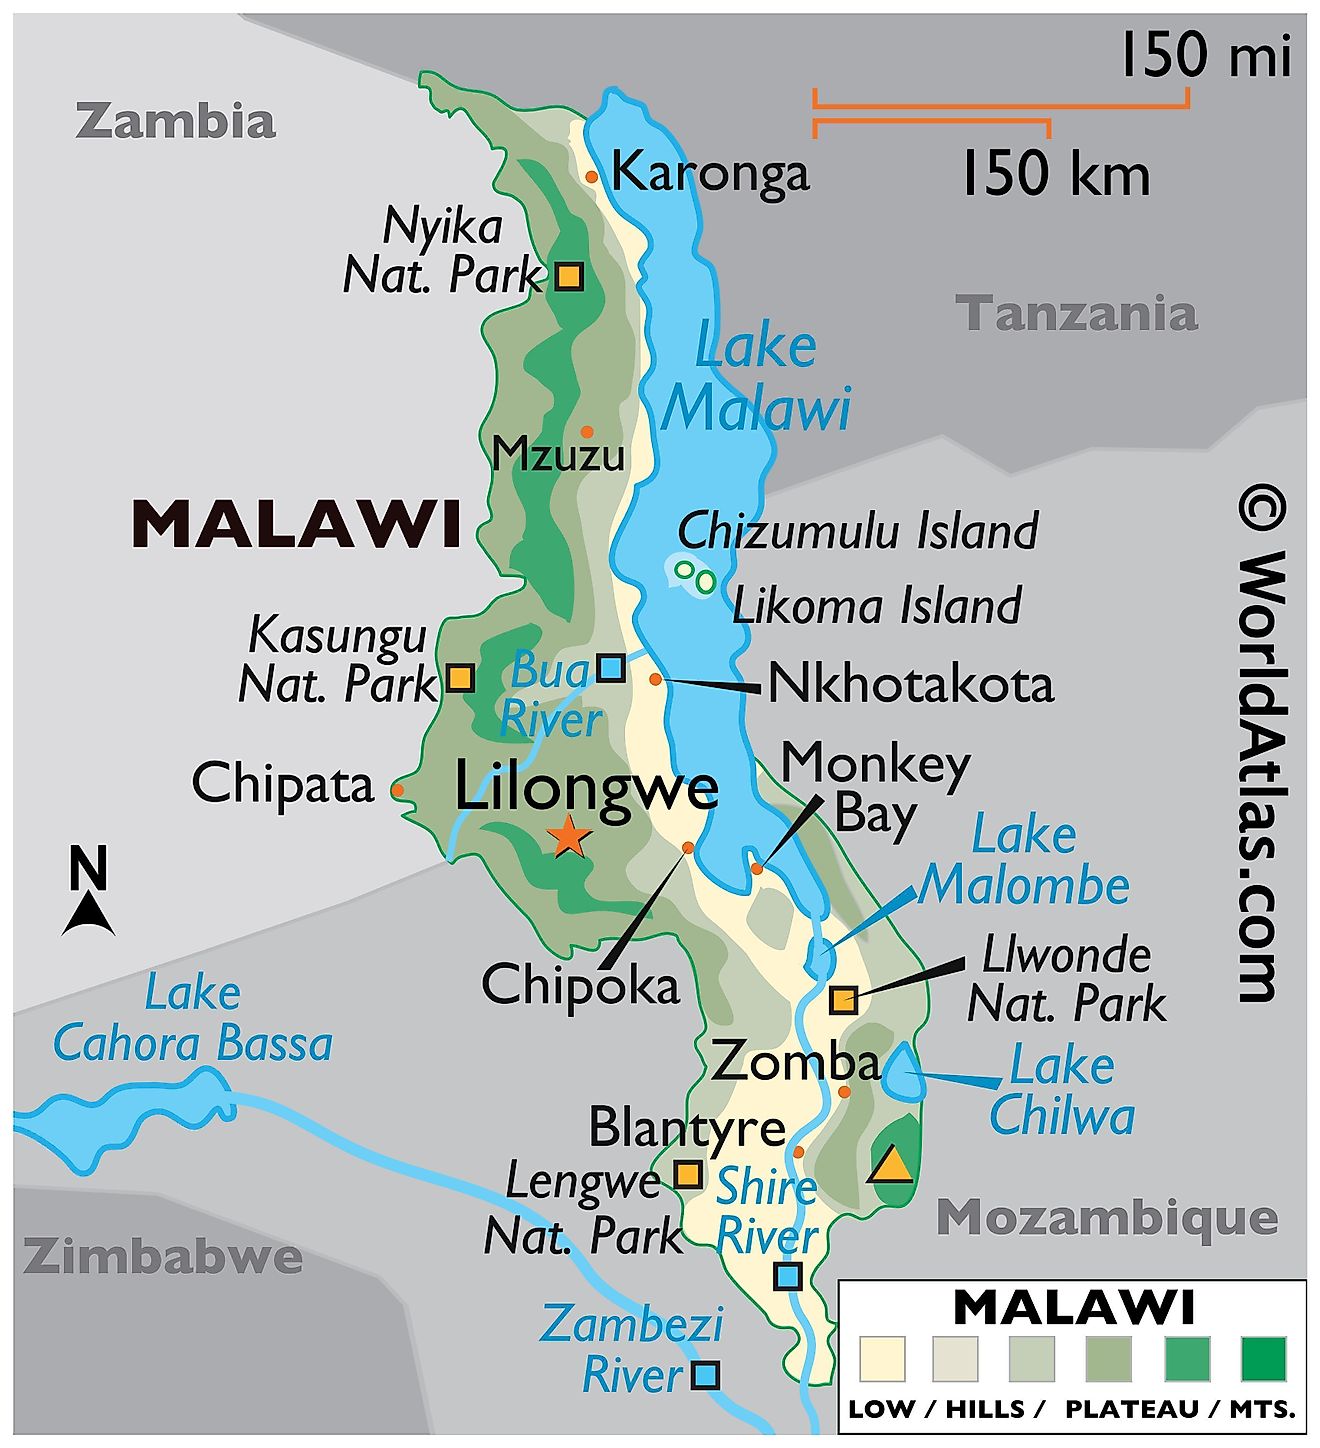 Physical Map of Malawi displaying state boundaries, relief, highest point, important cities, Lake Malawi, and major rivers.